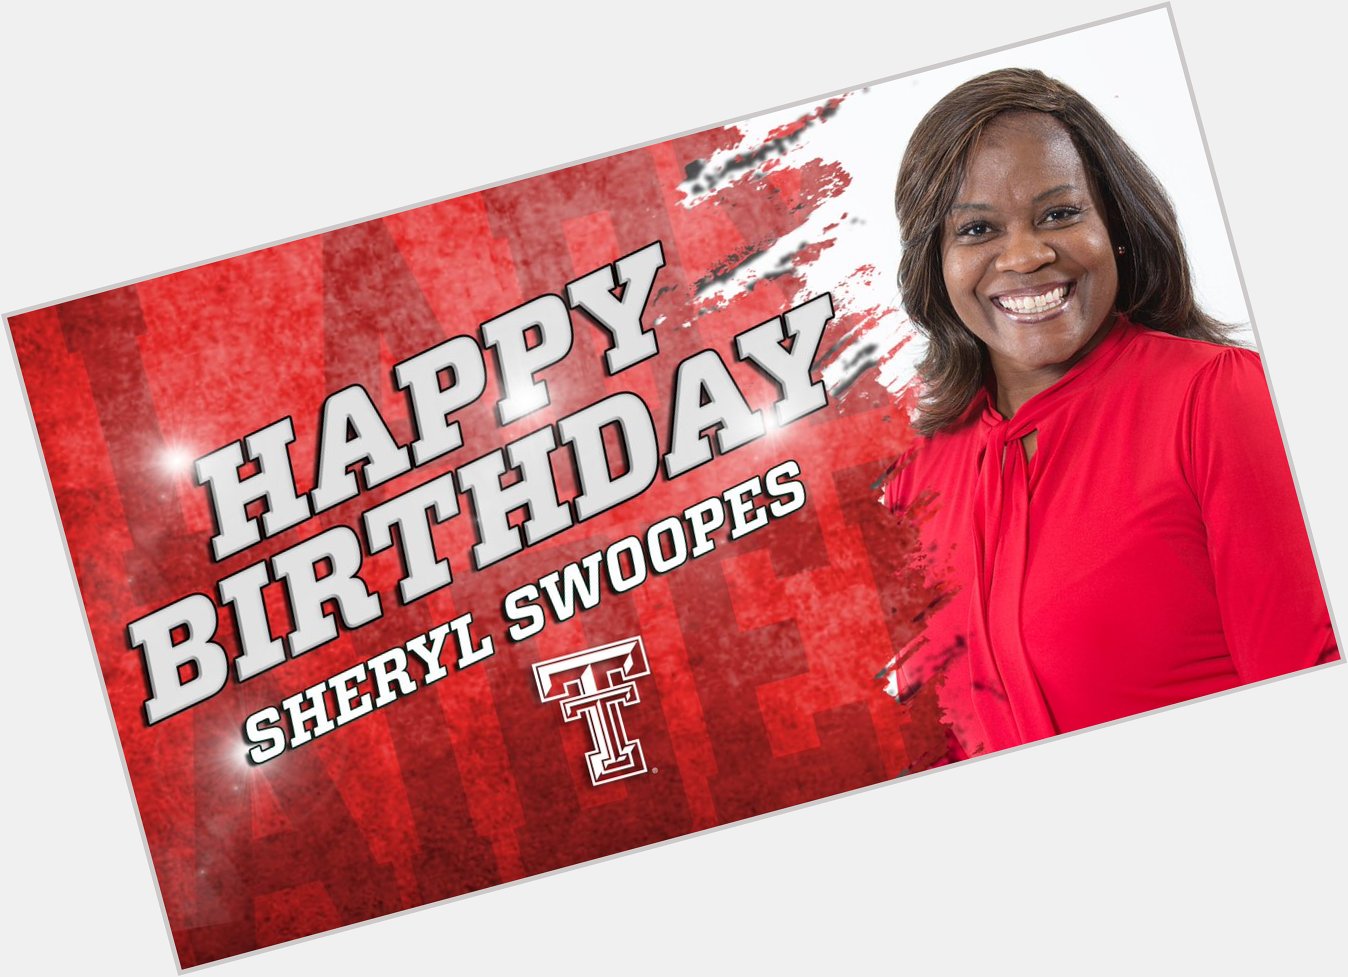  We want to wish a very happy birthday to Lady Raider great Sheryl Swoopes! 